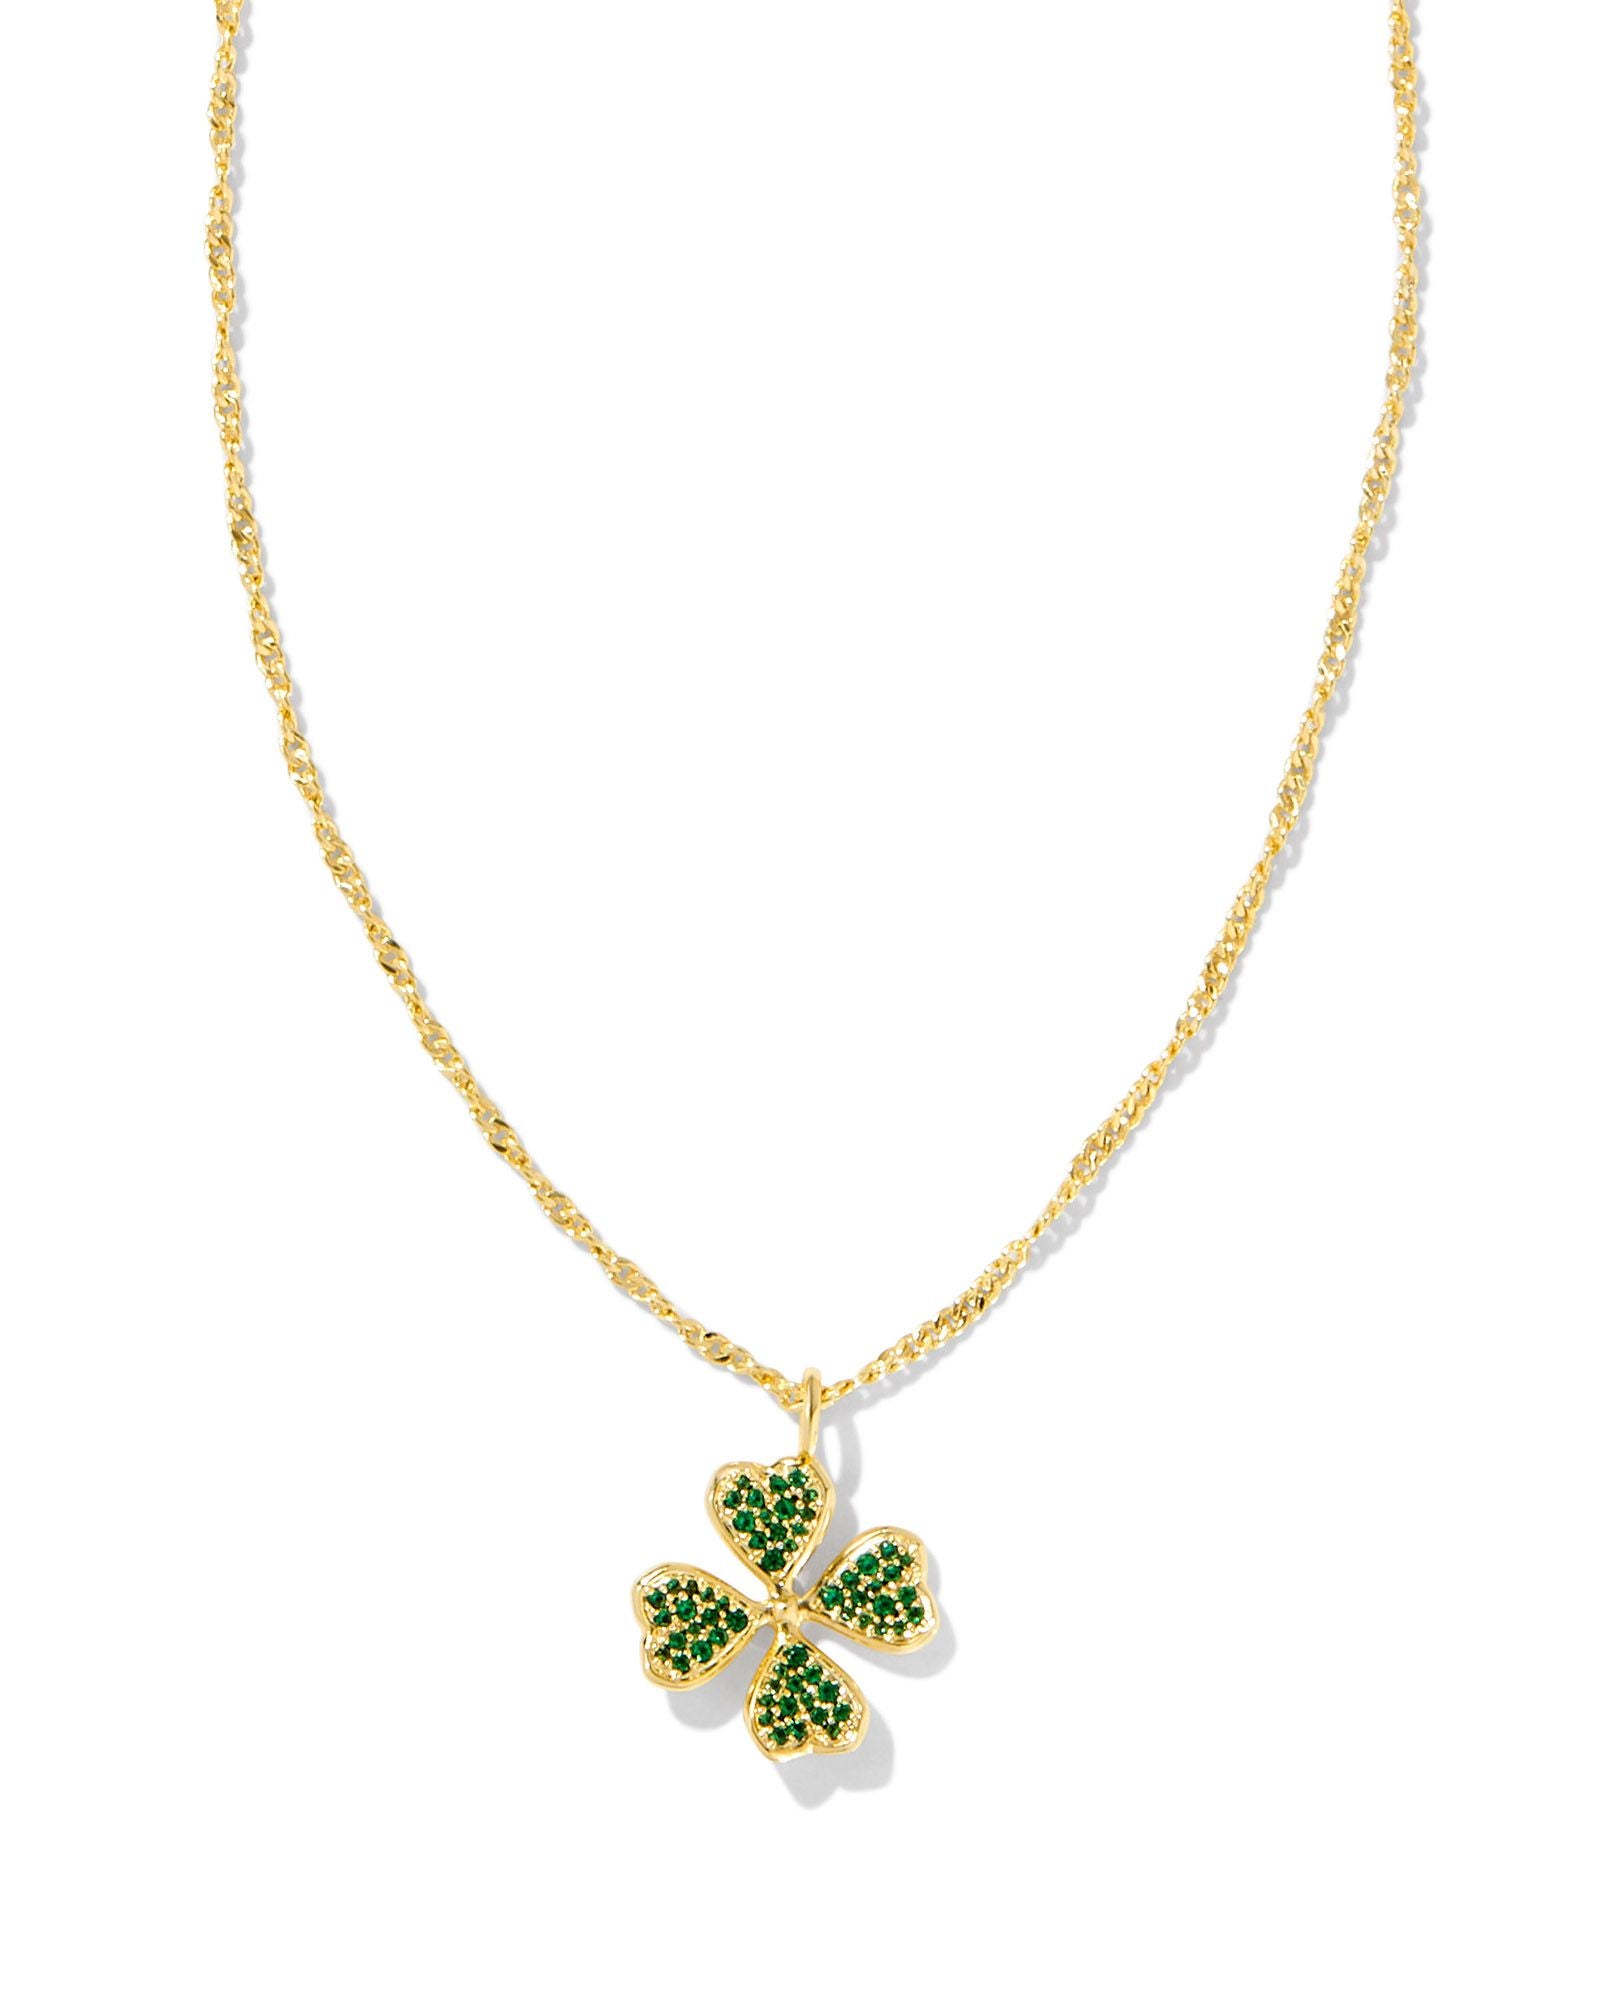 Clover Crystal Pendant Necklace Gold Green Crystals